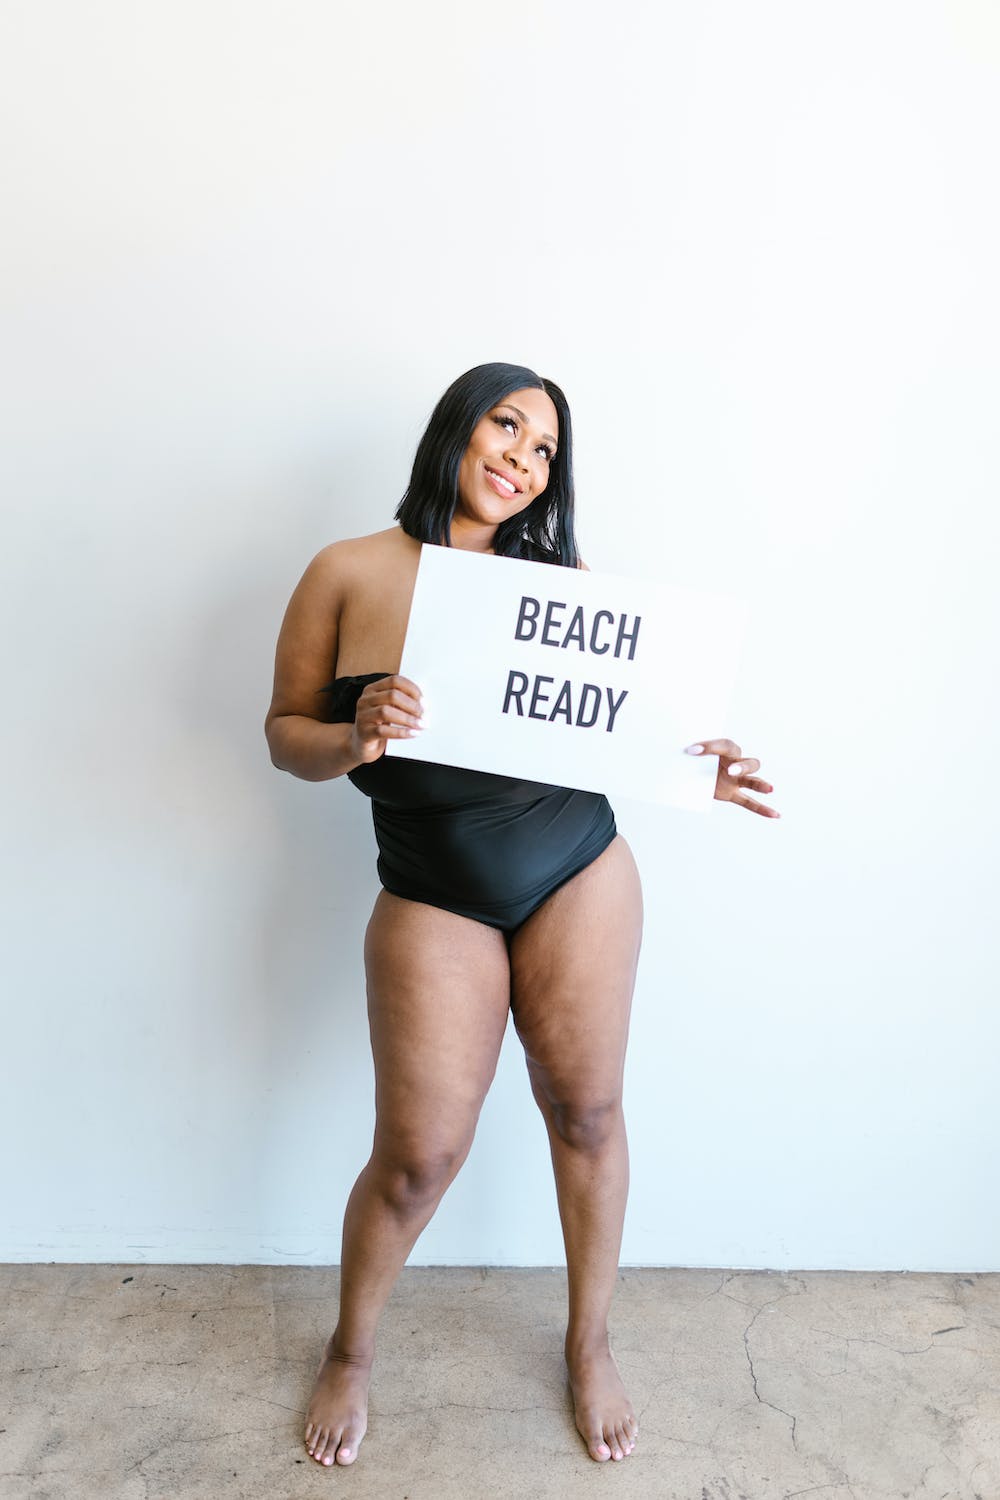 beach and pool overweight outfits beach ready